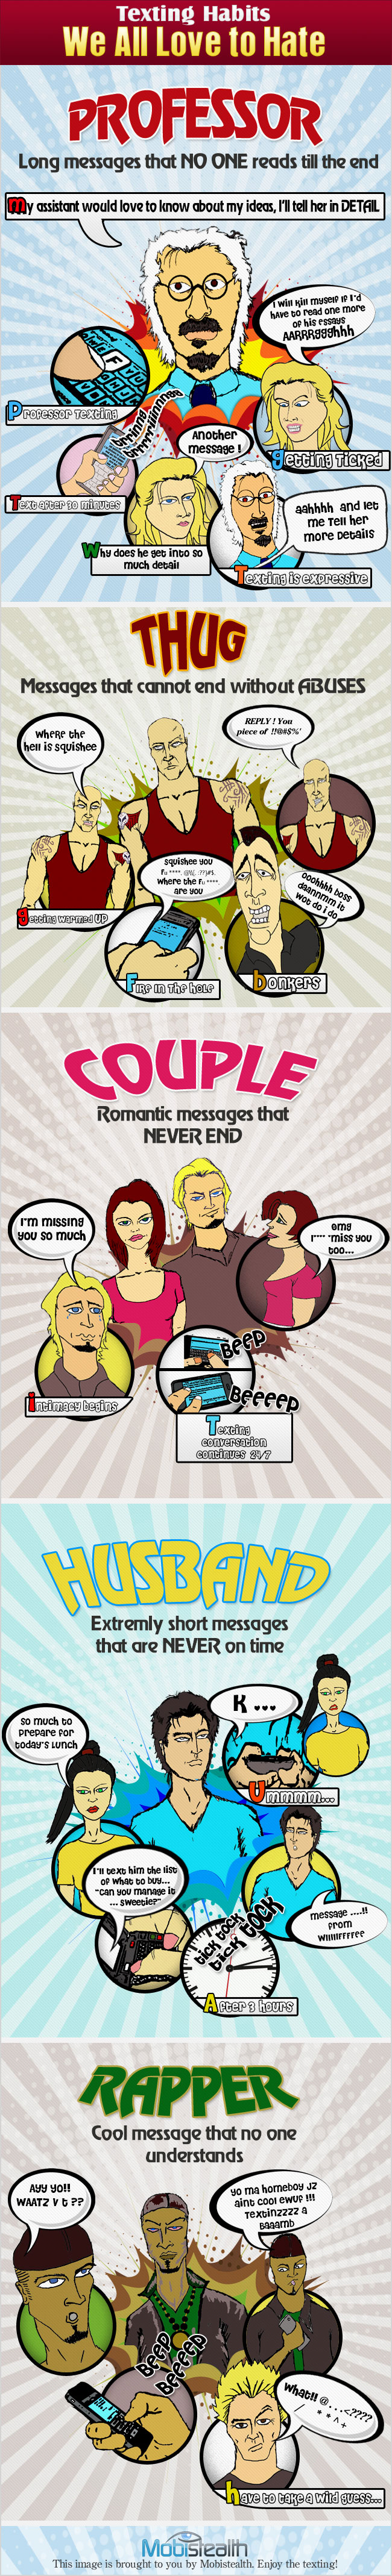 Text Messaging Habits We All Hate [Infographic]